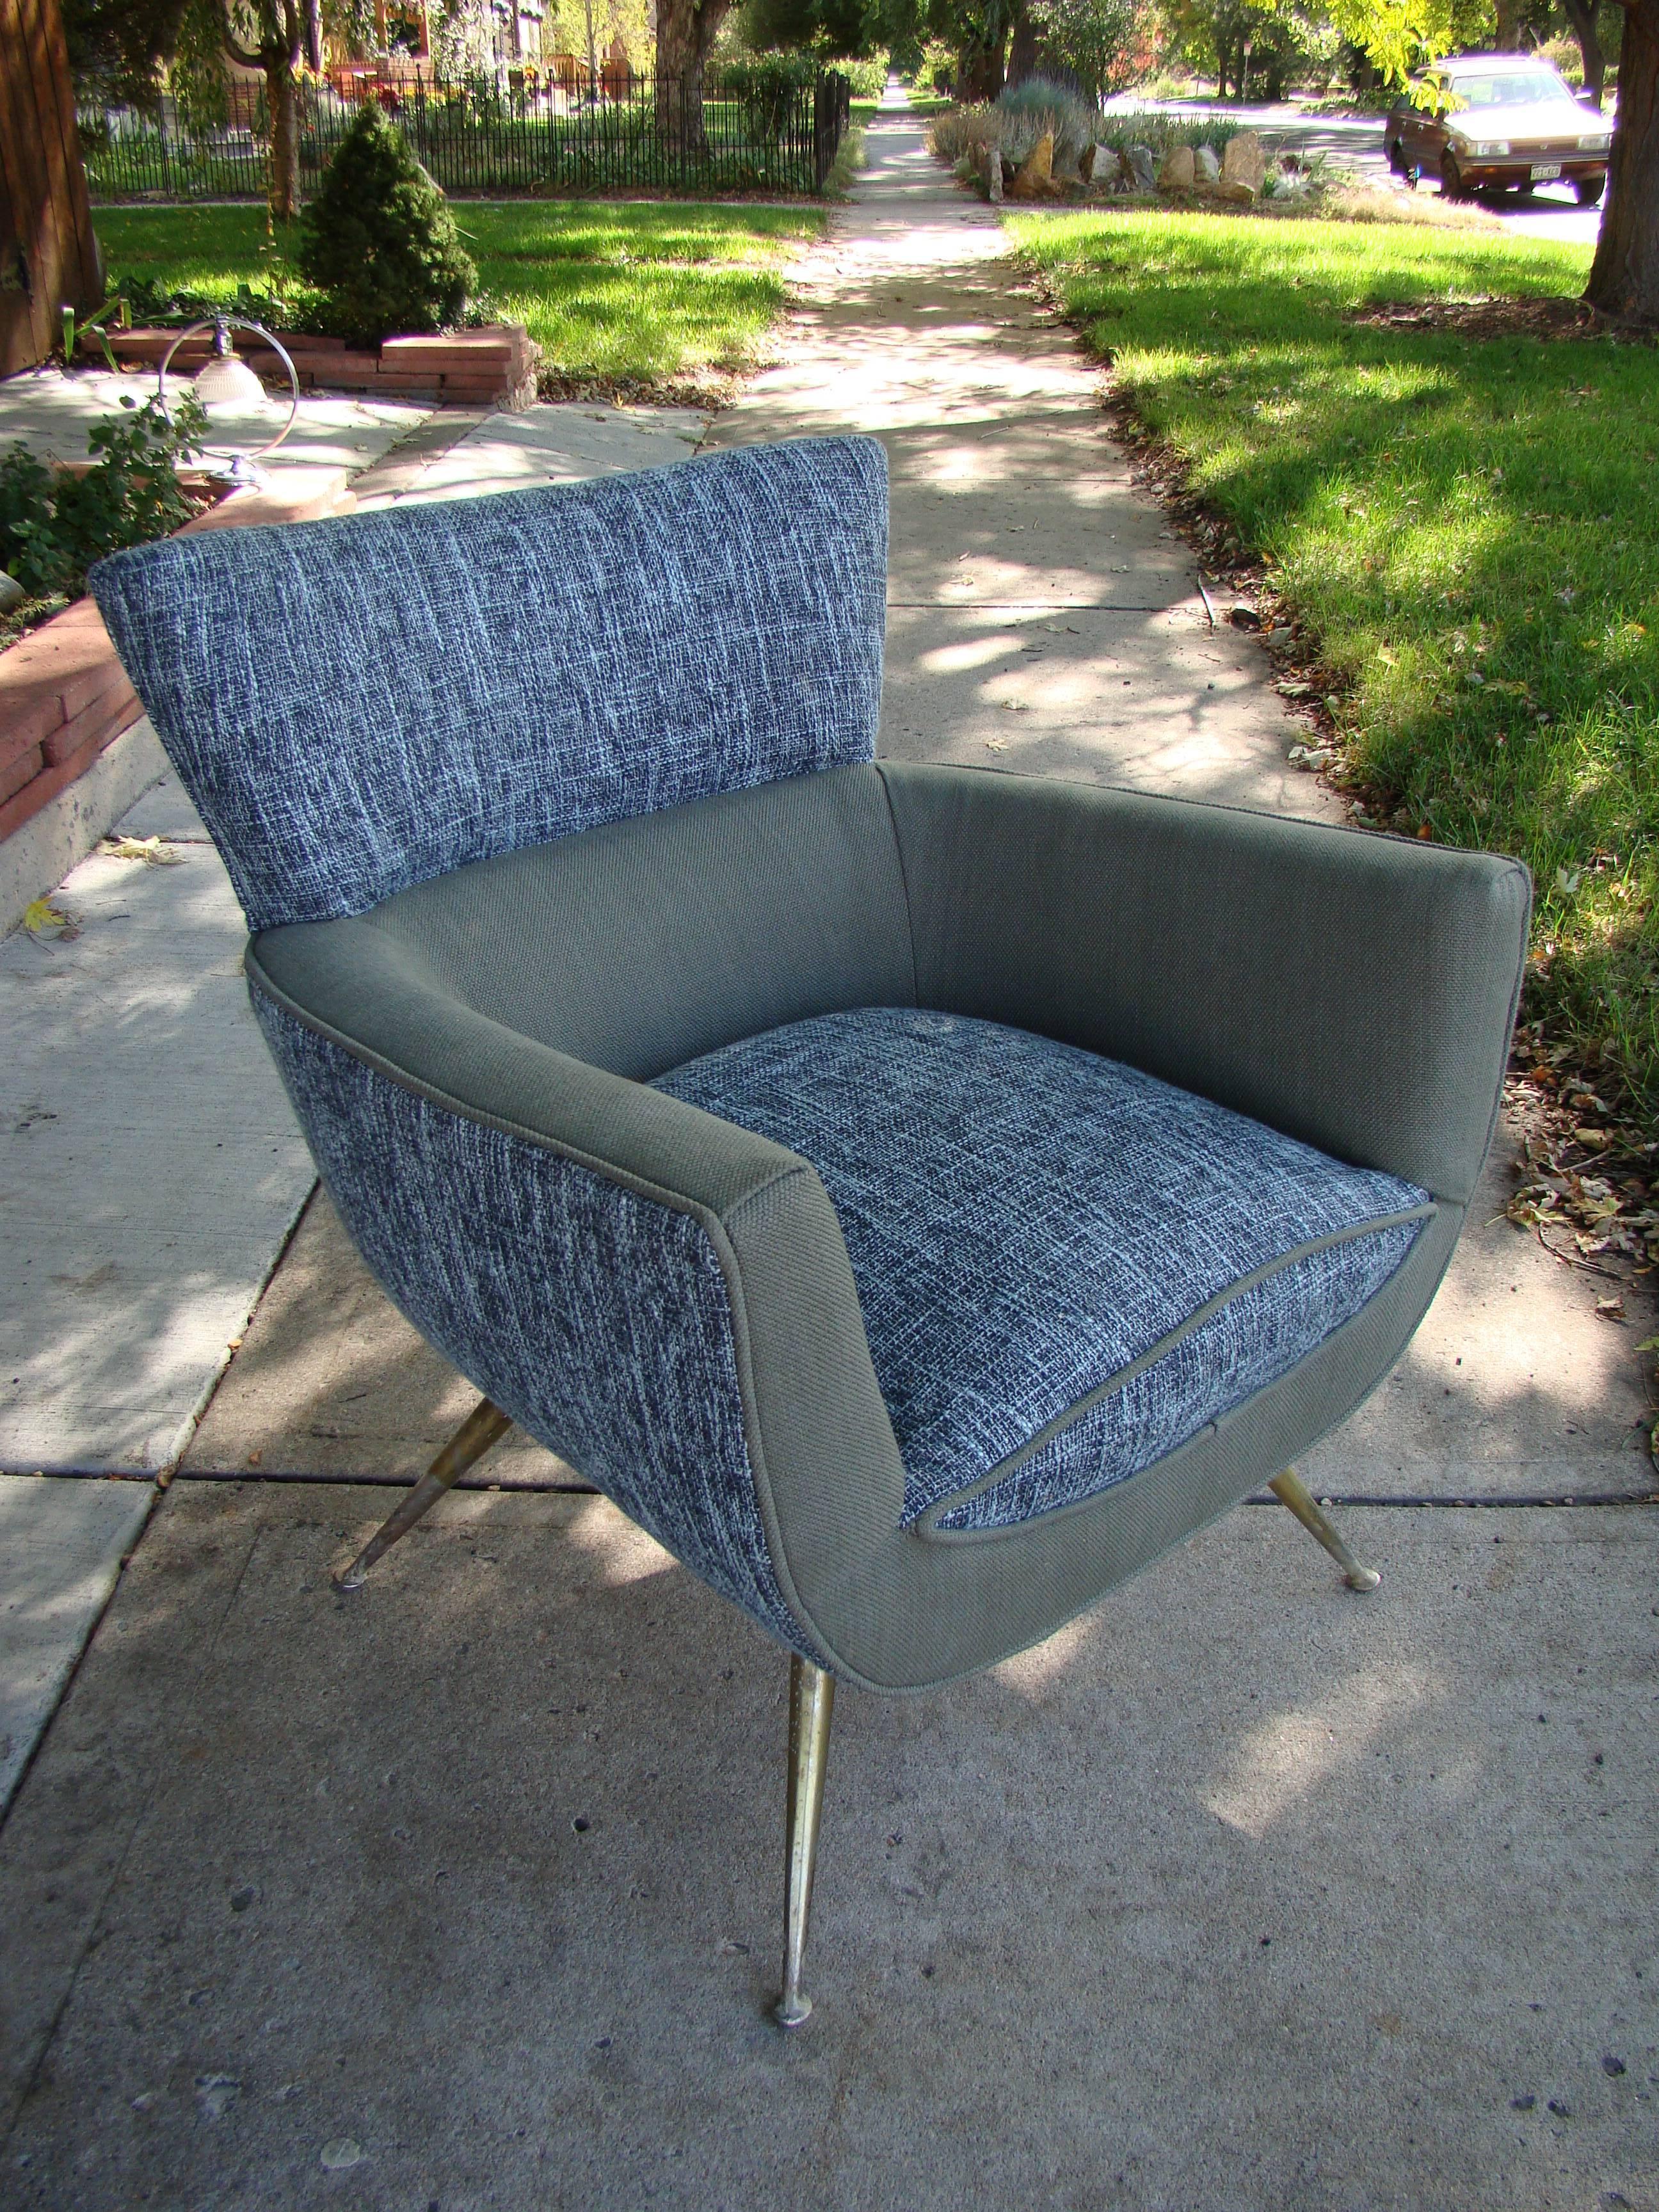 Unattributable, but undeniably Classic, early 1950s Italian design with dramatic tapered brass finish metal legs.
Recent upholstery in two tones, a beautiful crosshatch blue/white tweed and solid khaki/fatigue green tight tweed.
Lacquered brass